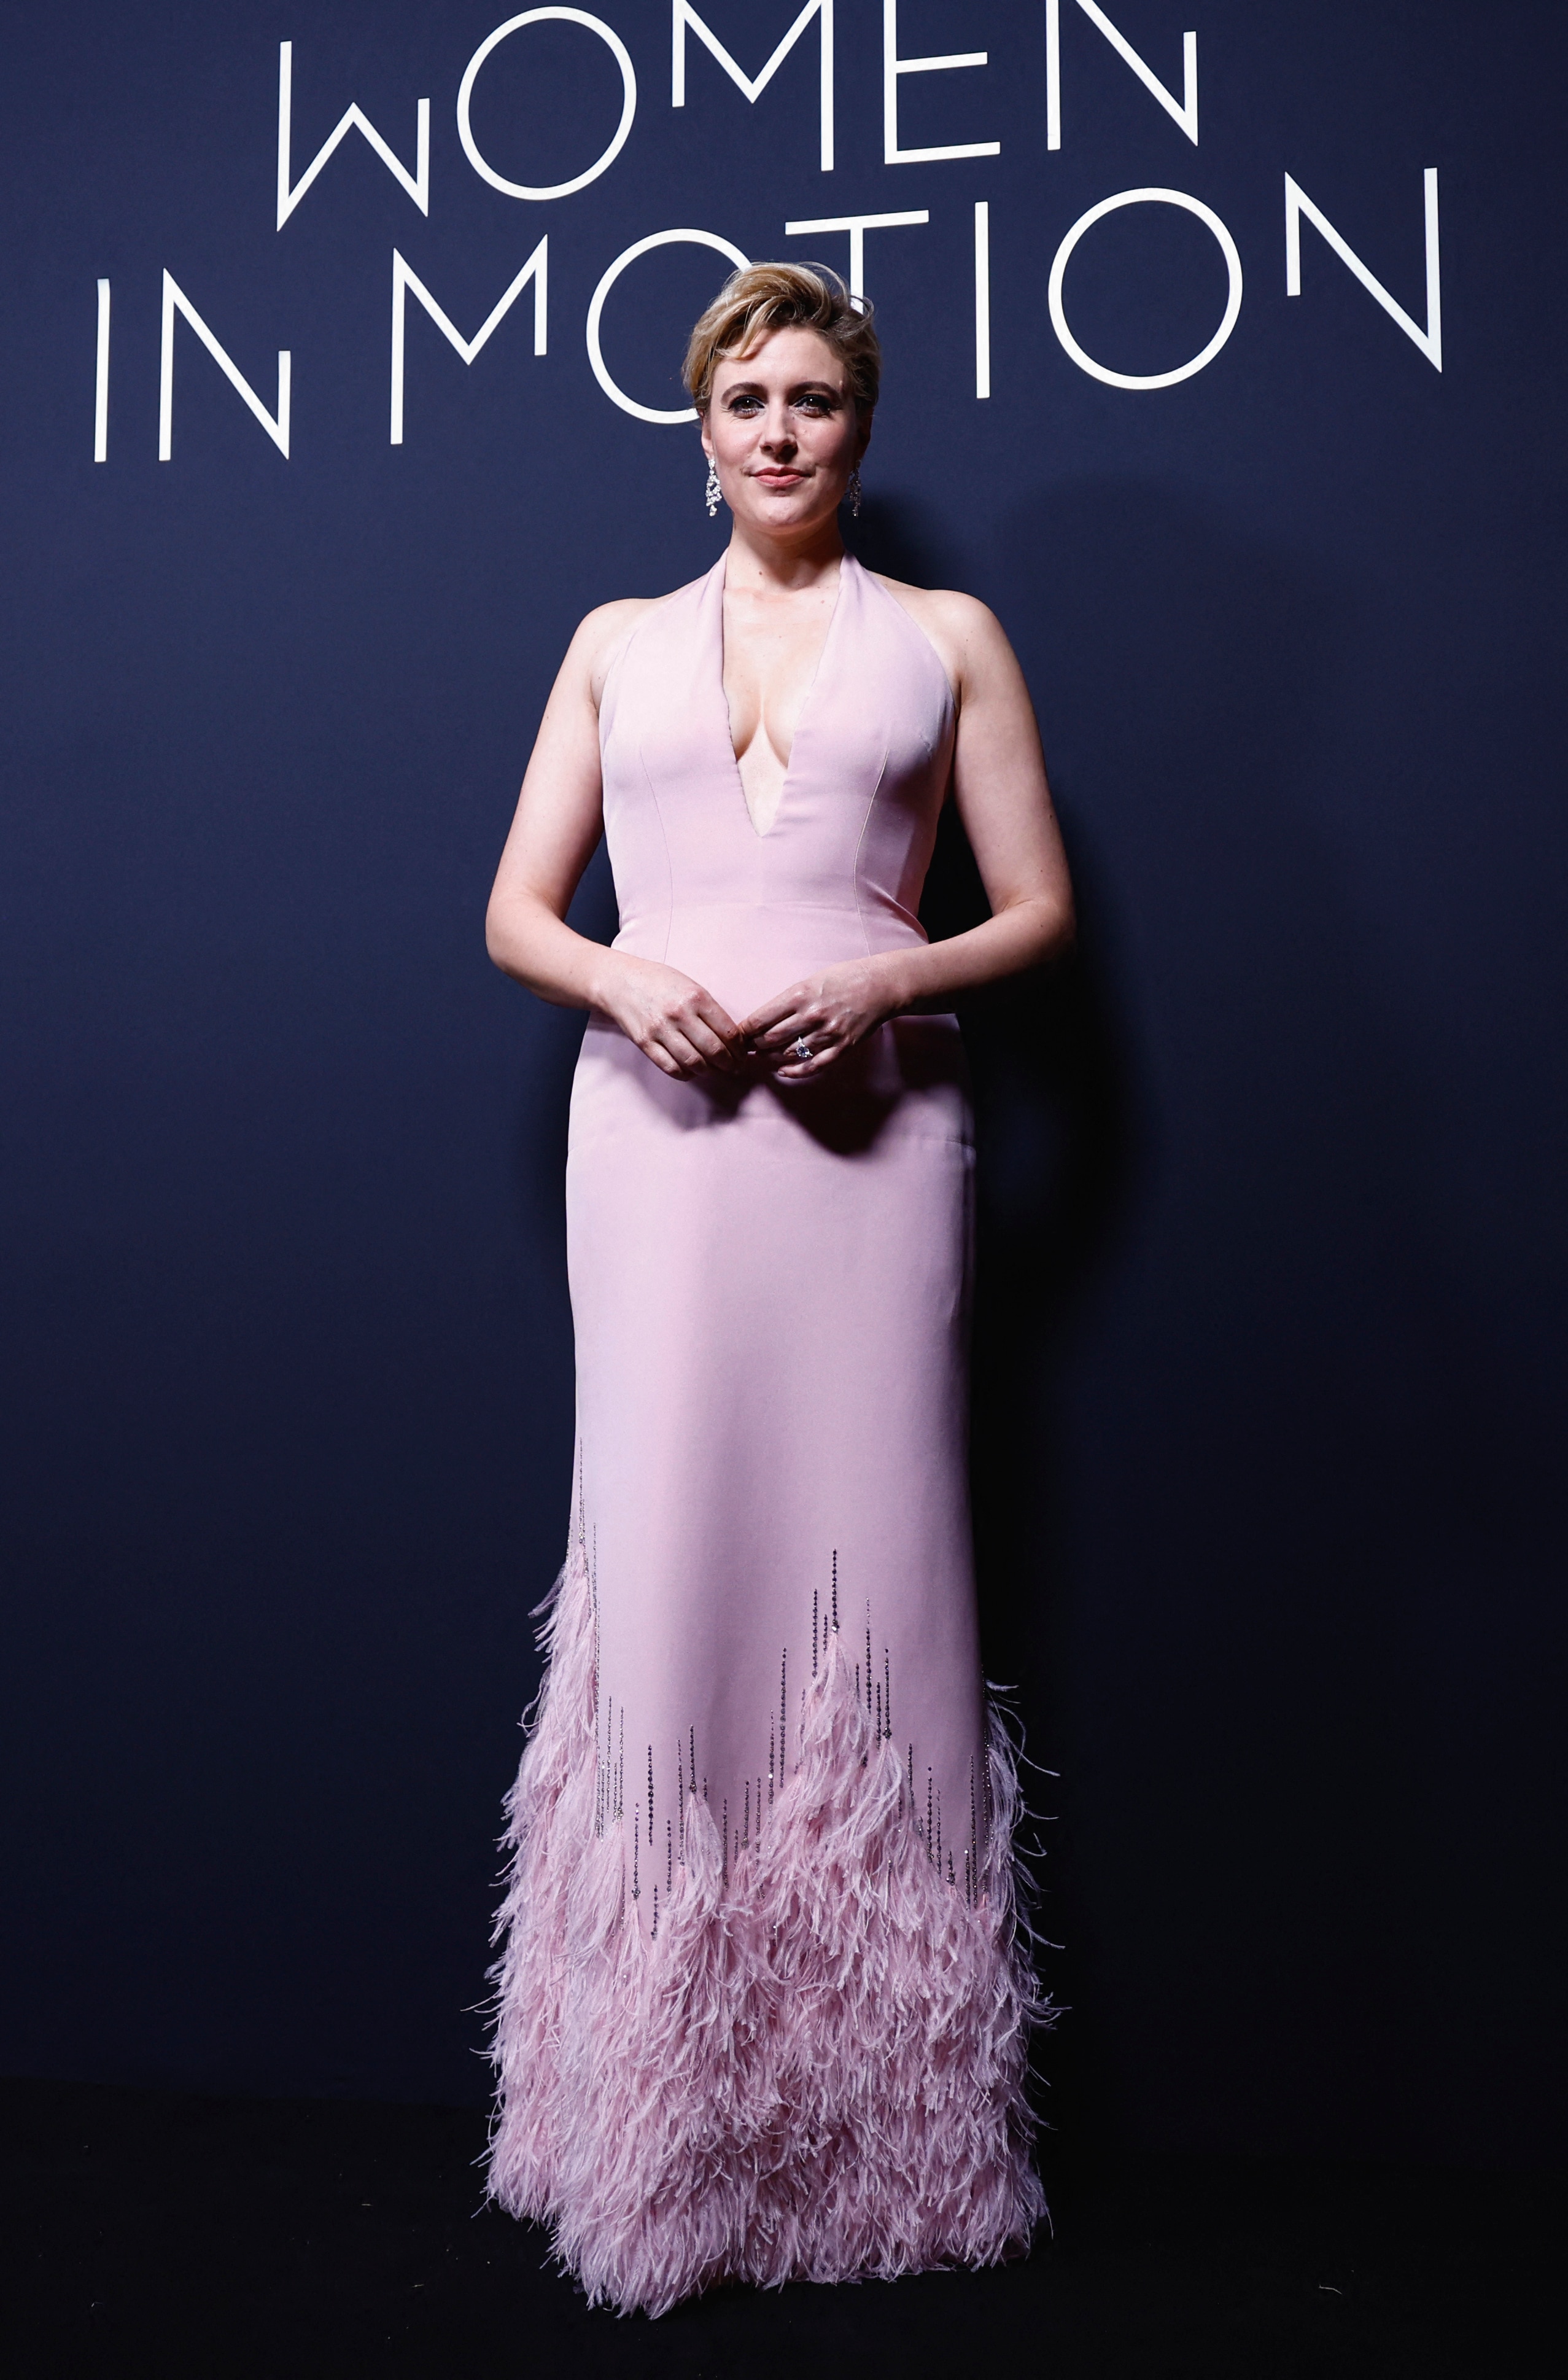 Greta Gerwig wearing a pale purple halter dress with feathery fringing at the bottom